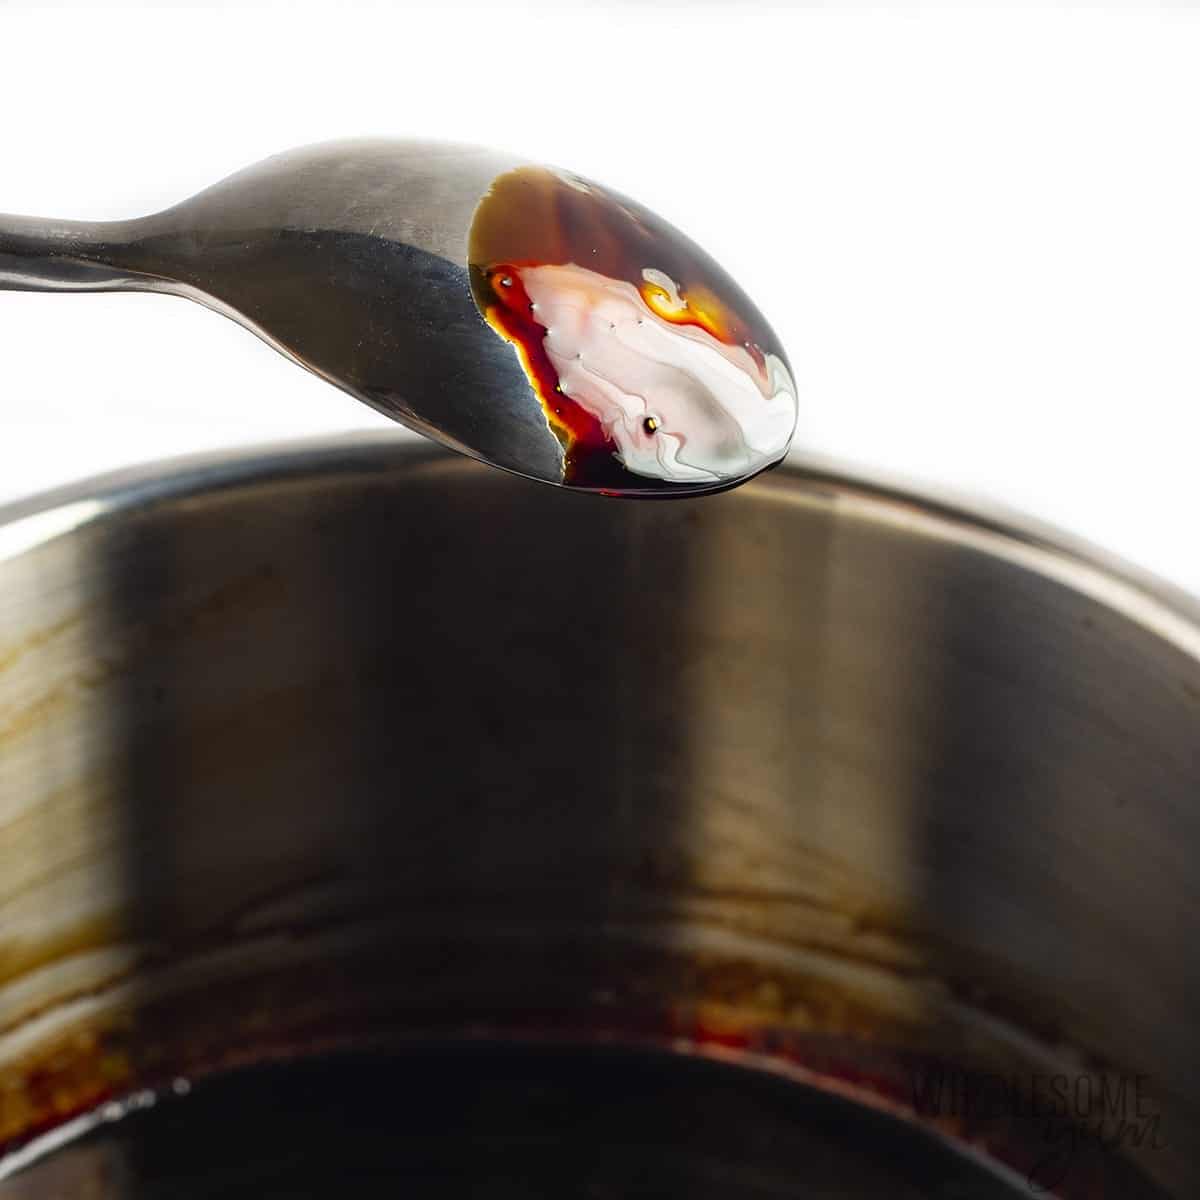 Balsamic reduction coating the back of a spoon.